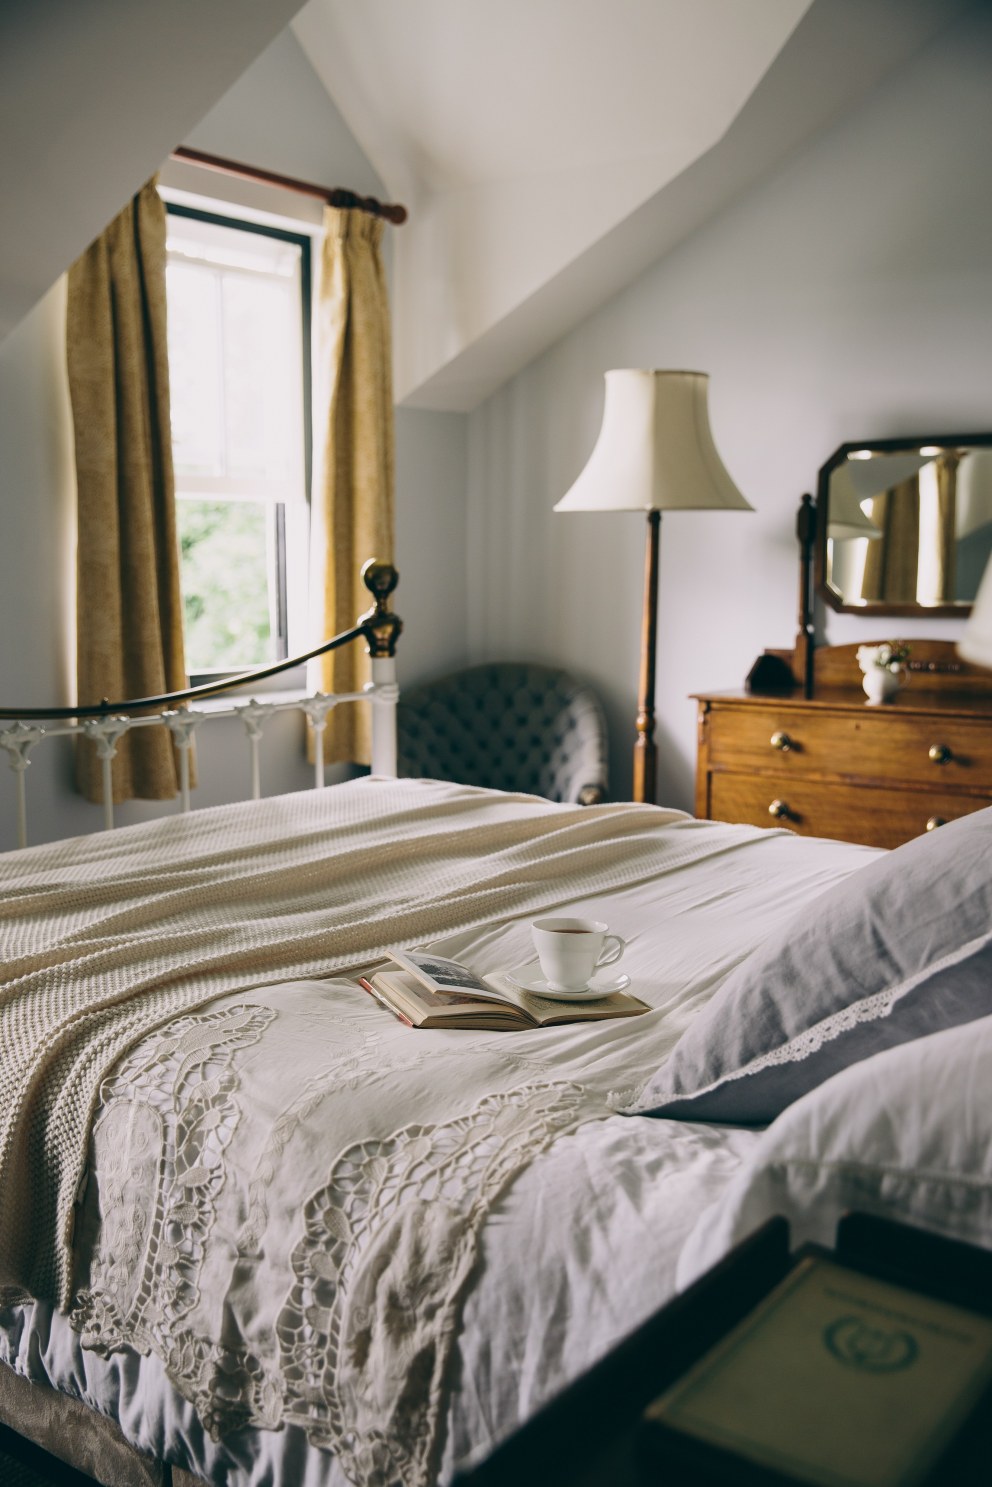 The Lakes | Wordsworth bed view | Interior Designers